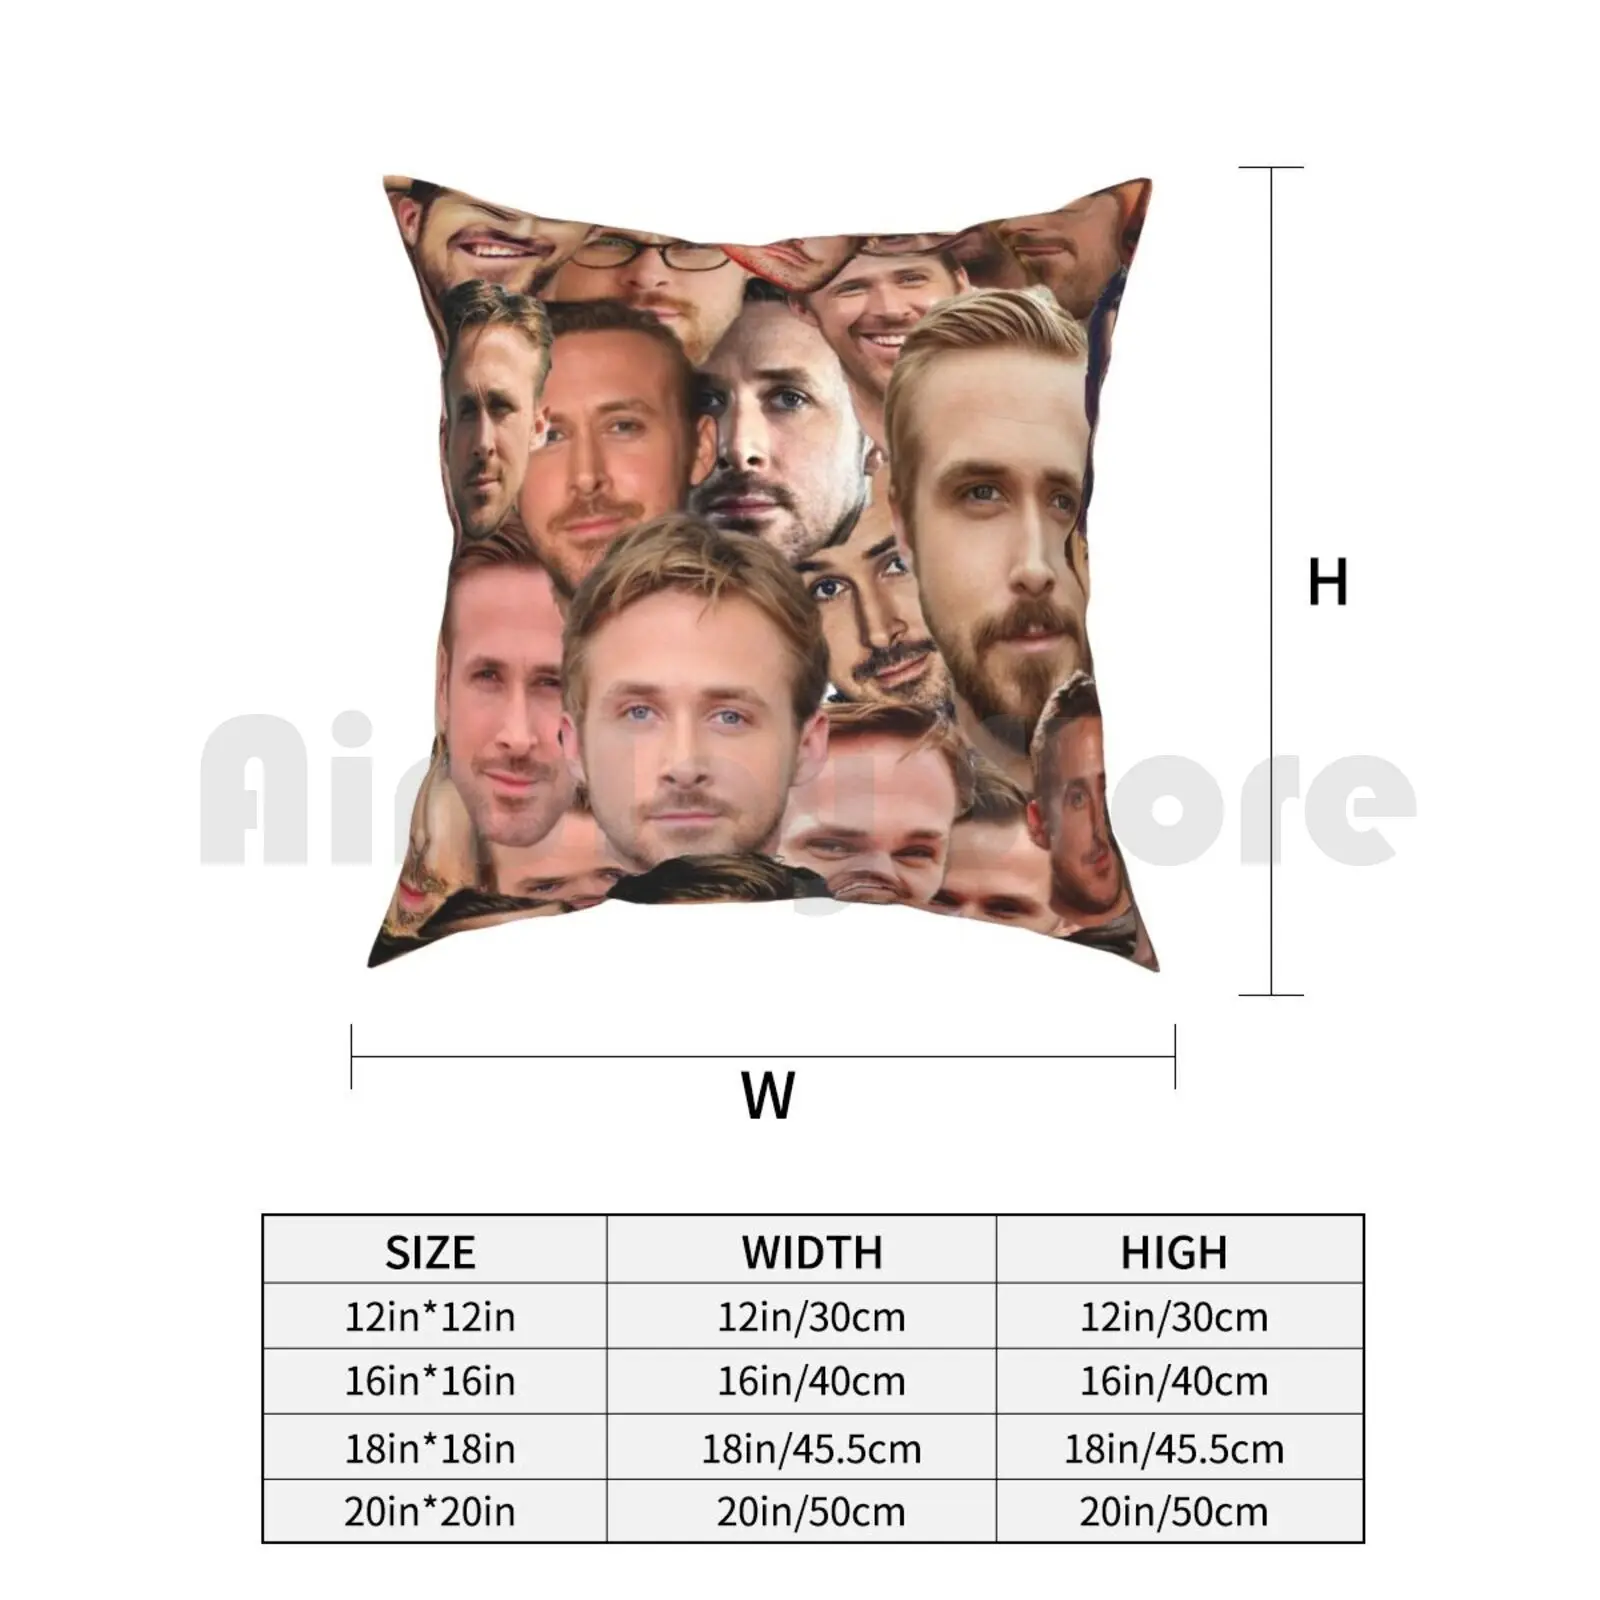 https://ae05.alicdn.com/kf/Hcc2207d5d48d492b957ebd782864c62fV/Ryan-Gosling-Pillow-Case-Printed-Home-Soft-Throw-Pillow-Ryan-Gosling-Gosling-Ryan-Love-Hot-Abs.jpg